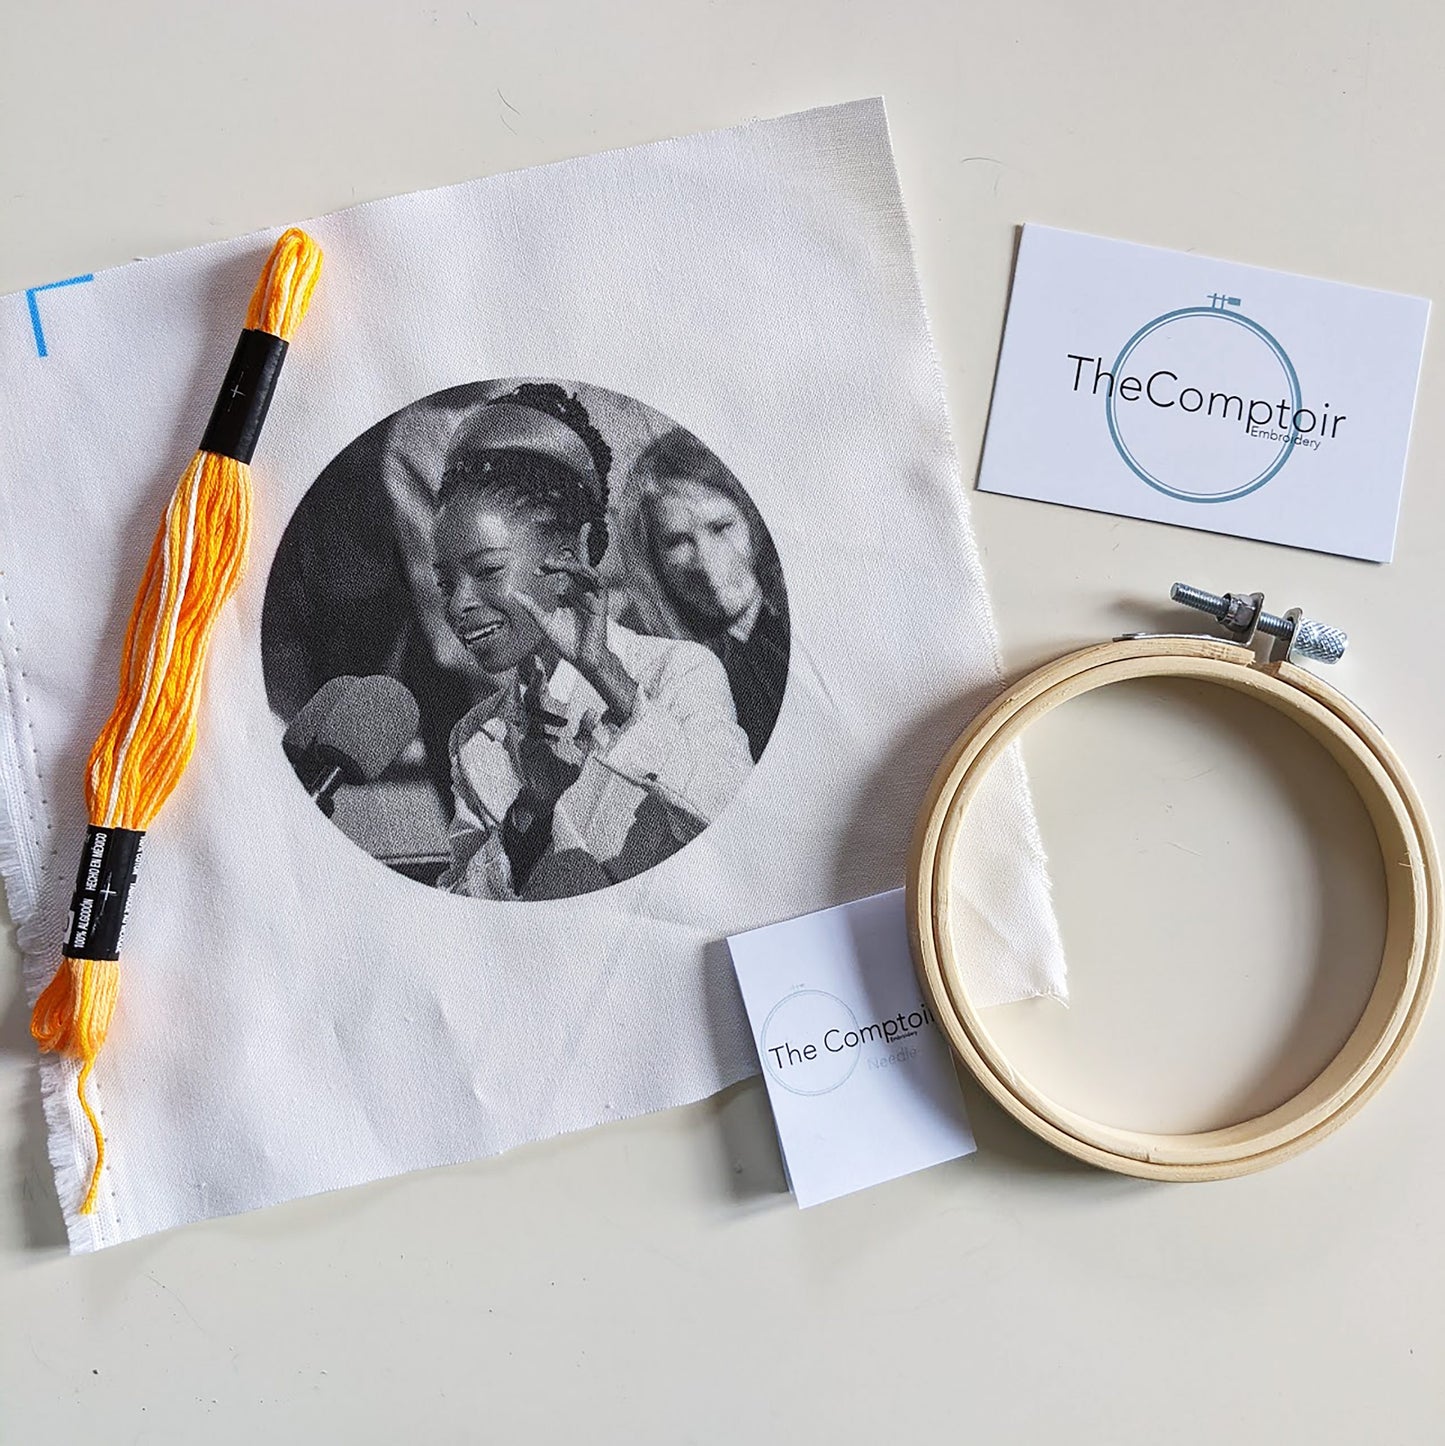 LAST CHANCE - Heroes Embroidery Kit By Le Comptoir